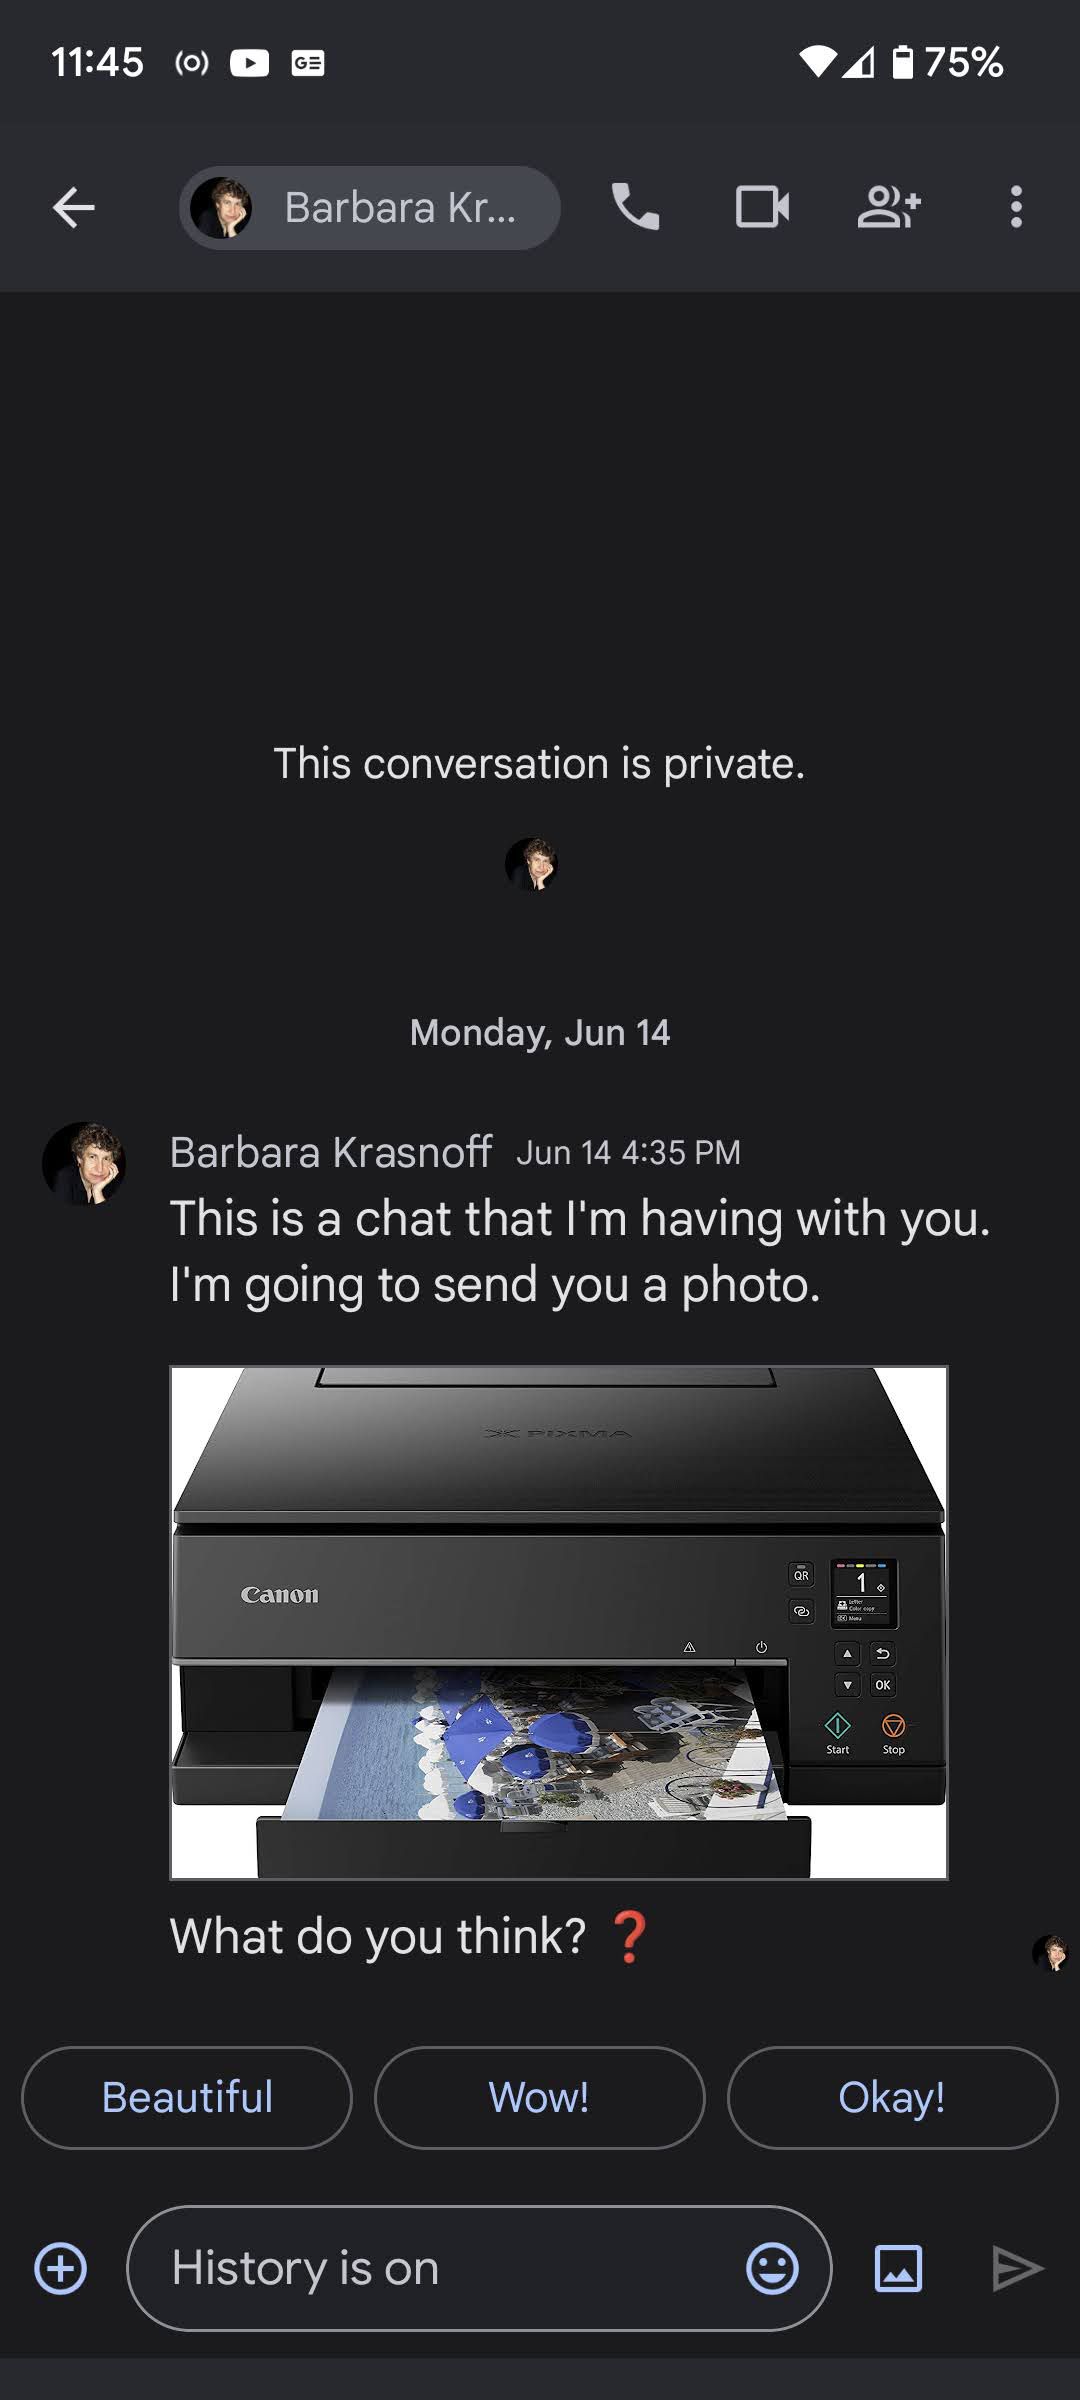 You can include photos and other media with your chats.